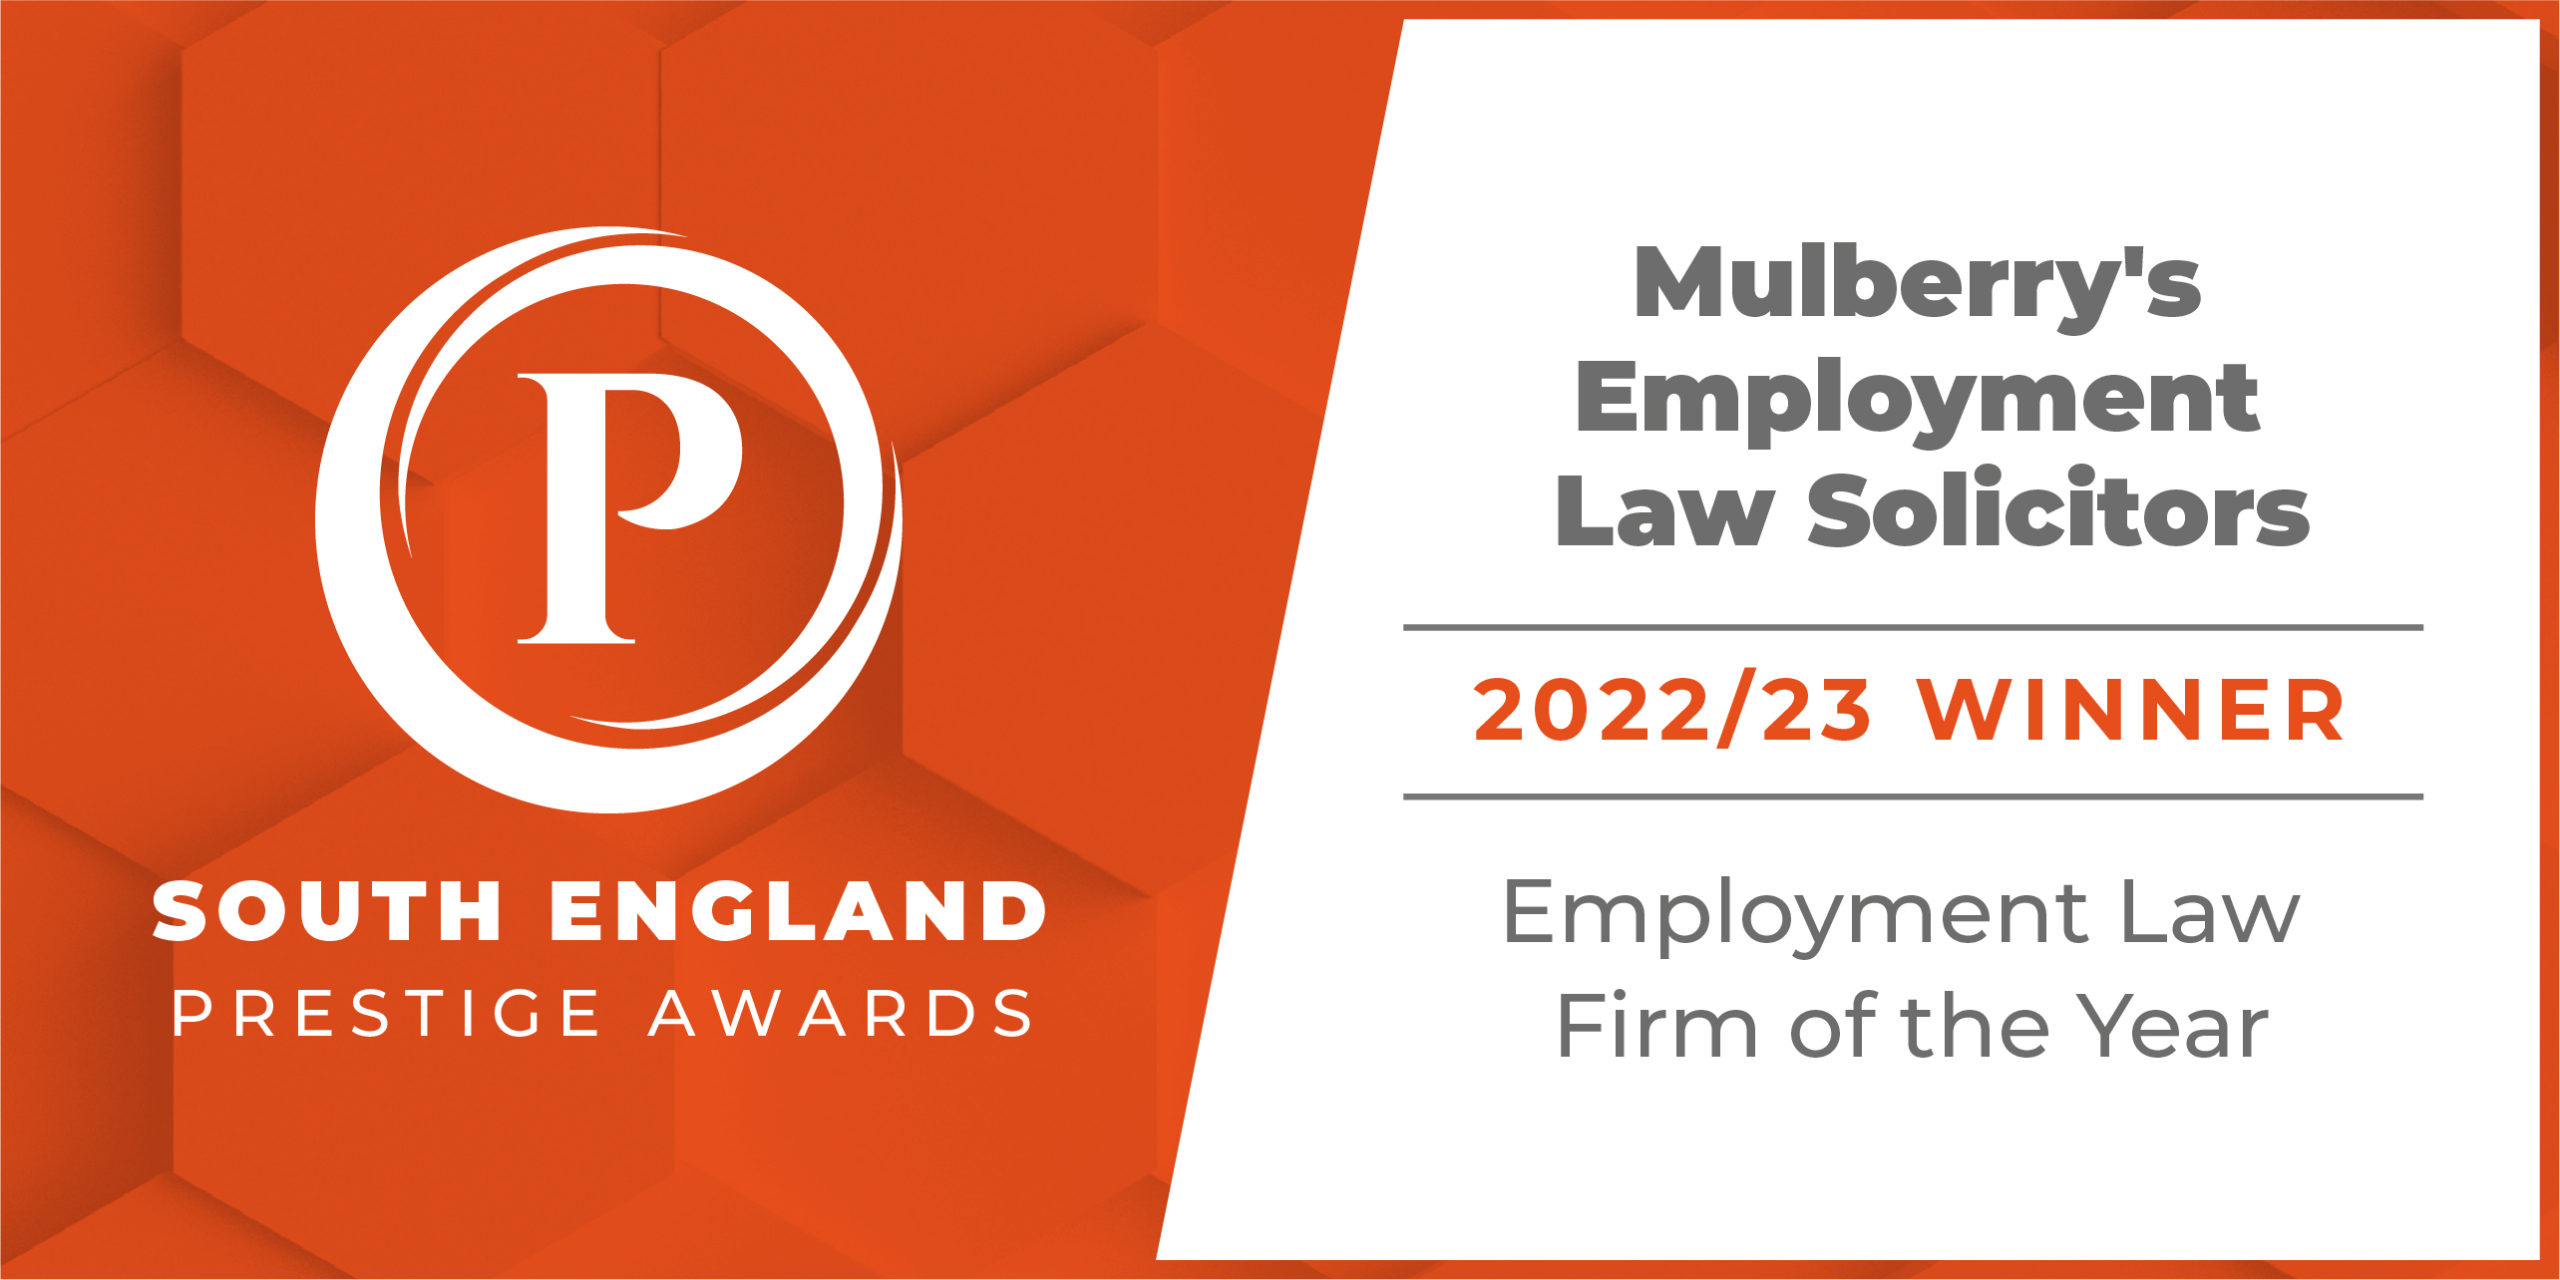 Employment Law Firm of the Year